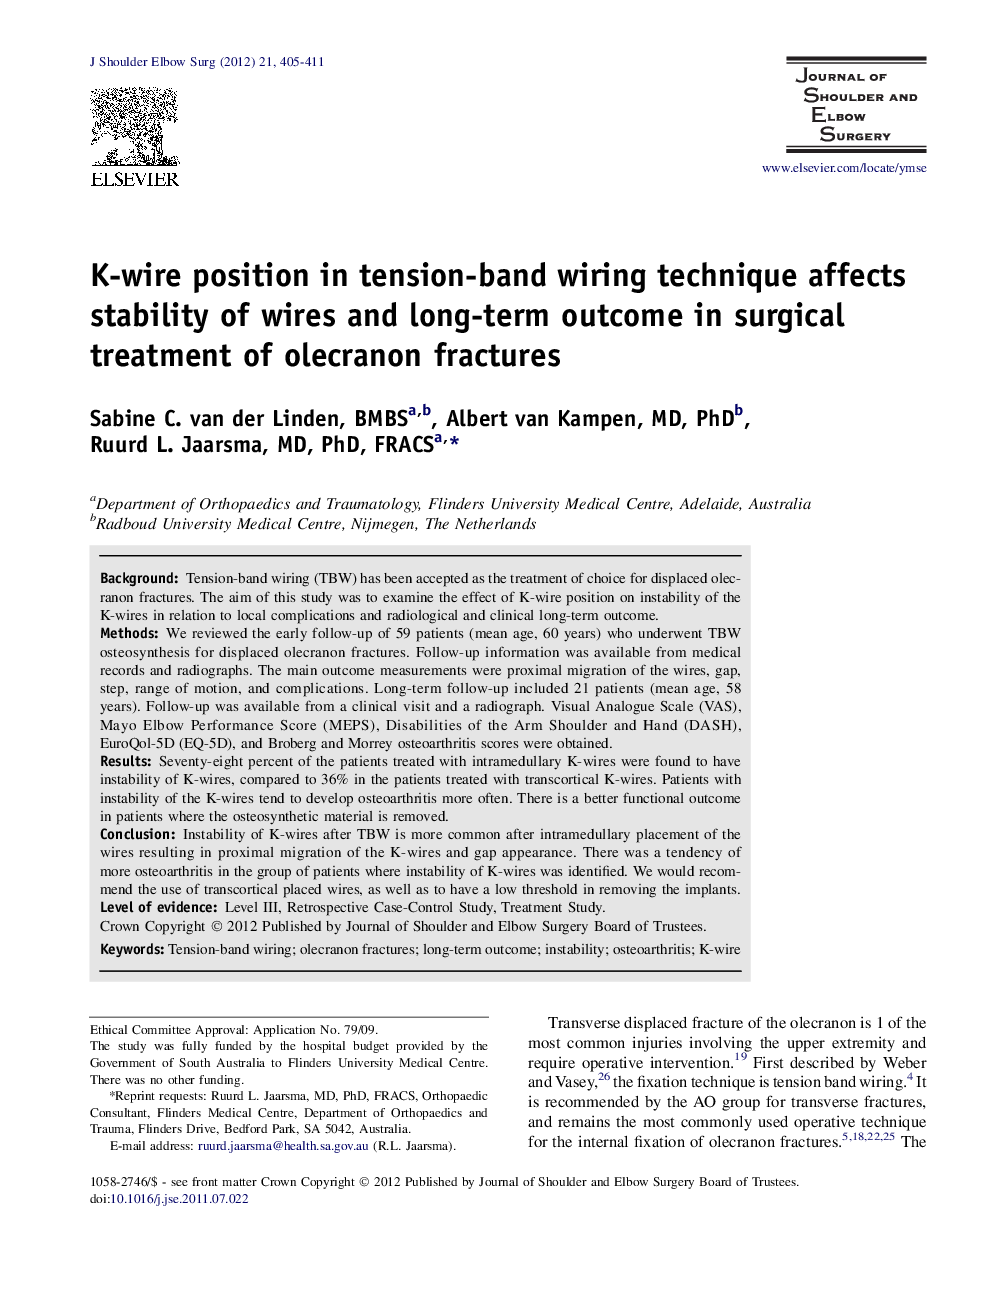 K-wire position in tension-band wiring technique affects stability of wires and long-term outcome in surgical treatment of olecranon fractures 